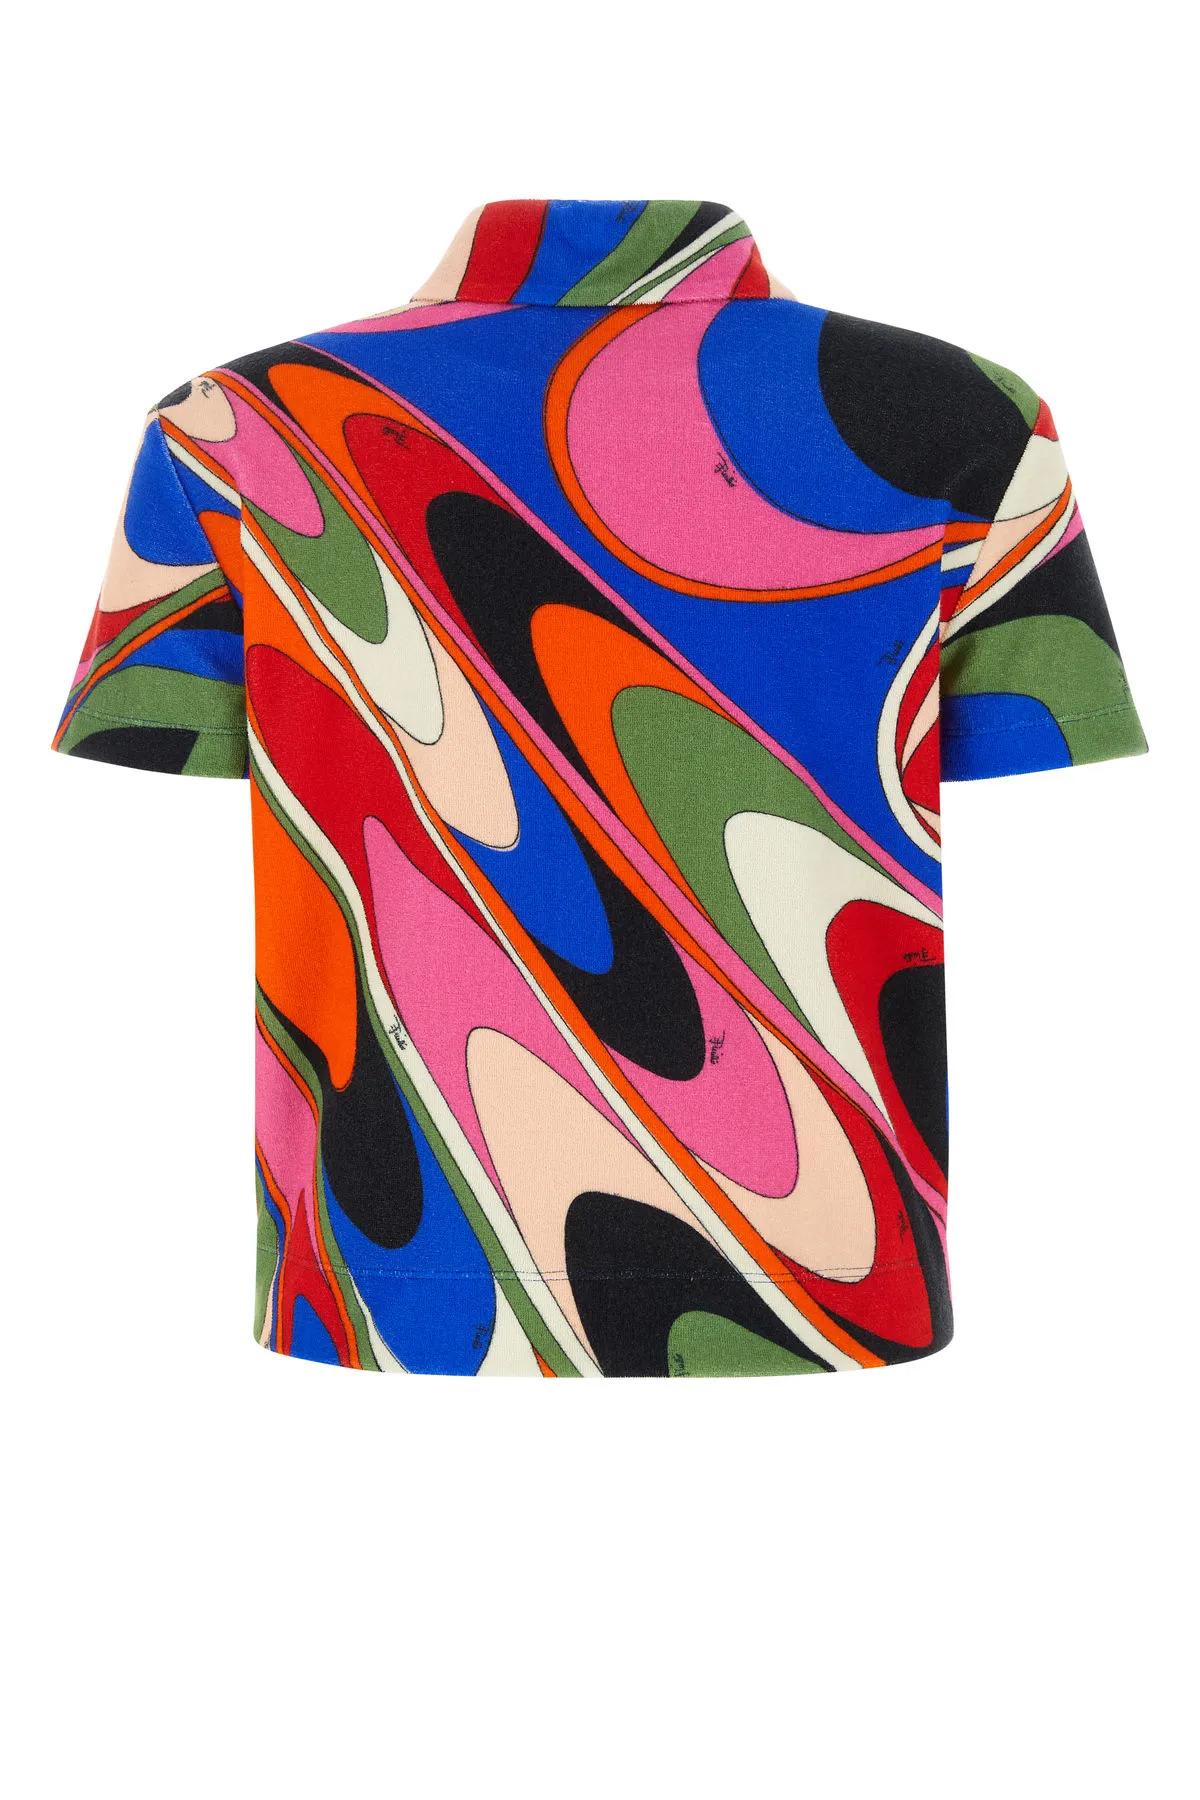 Emilio Pucci Printed Terry Fabric Polo Shirt - ShopStyle Tops